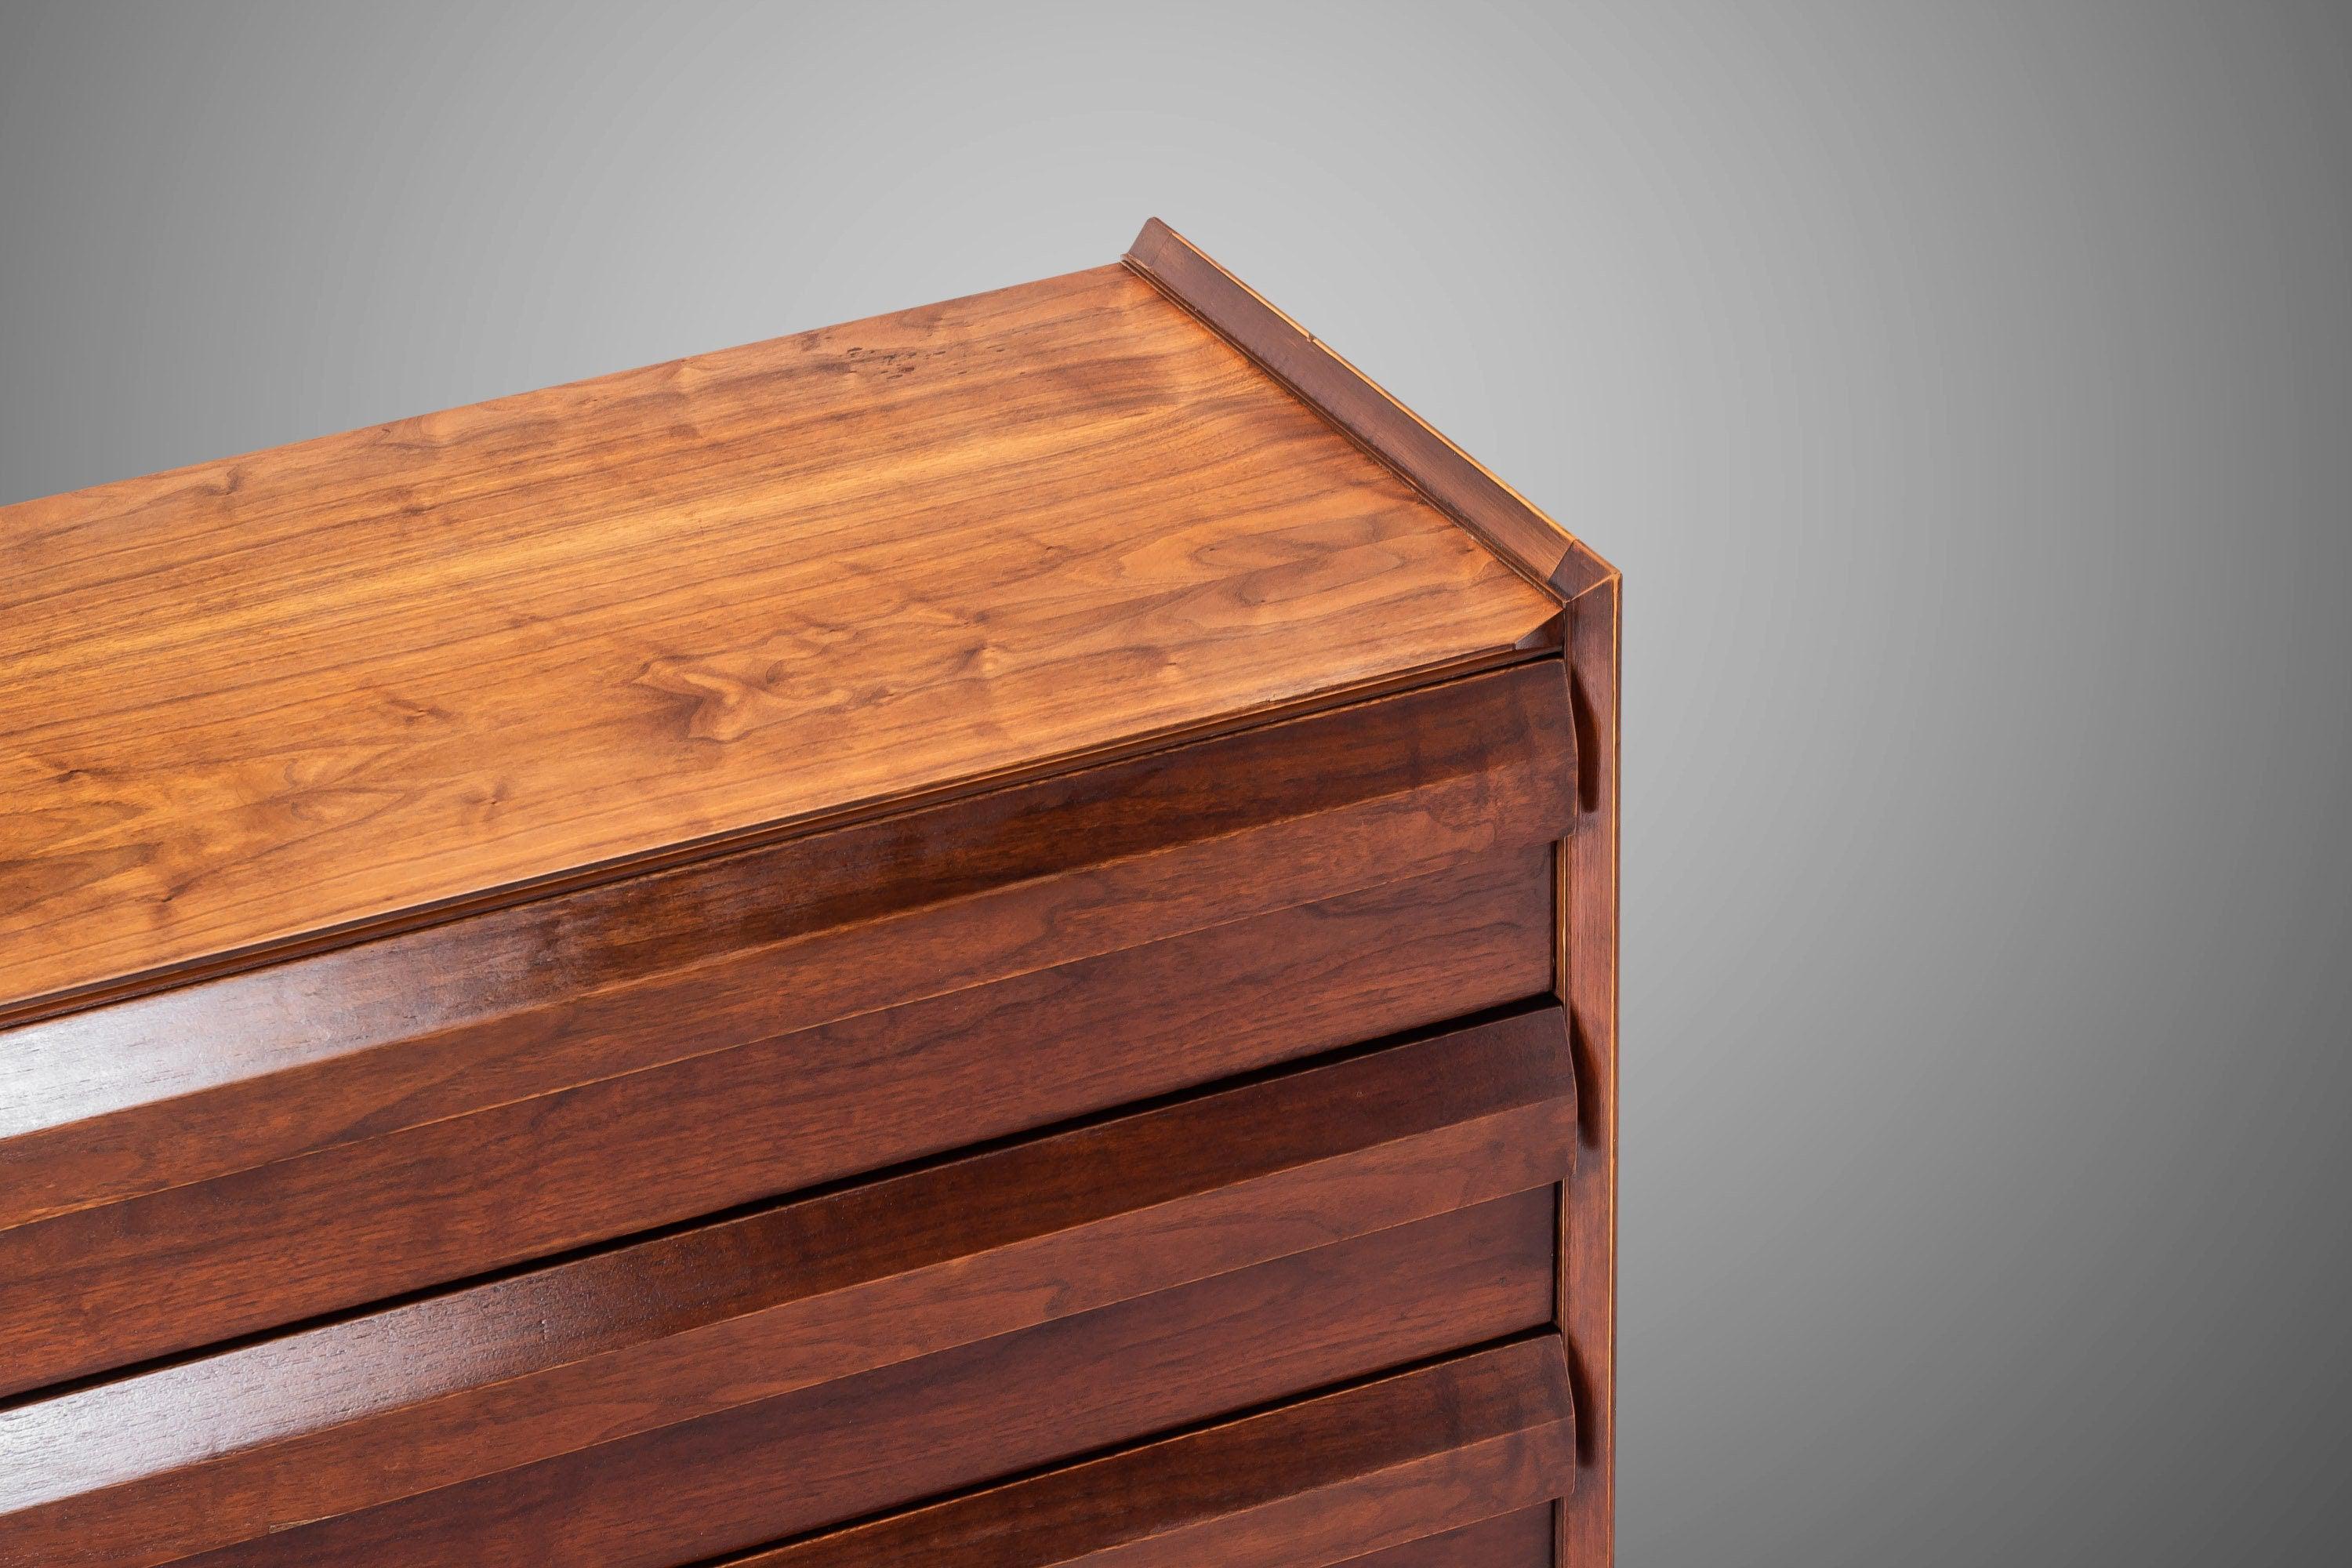 First Edition collection manufactured by Lane Furniture, Alta vista in the 1950s. The walnut and pecan composition features drawers with a sculpted, louvered drawer pulls and sharp, angular lines. The walnut exhibits outstanding grain patterns and